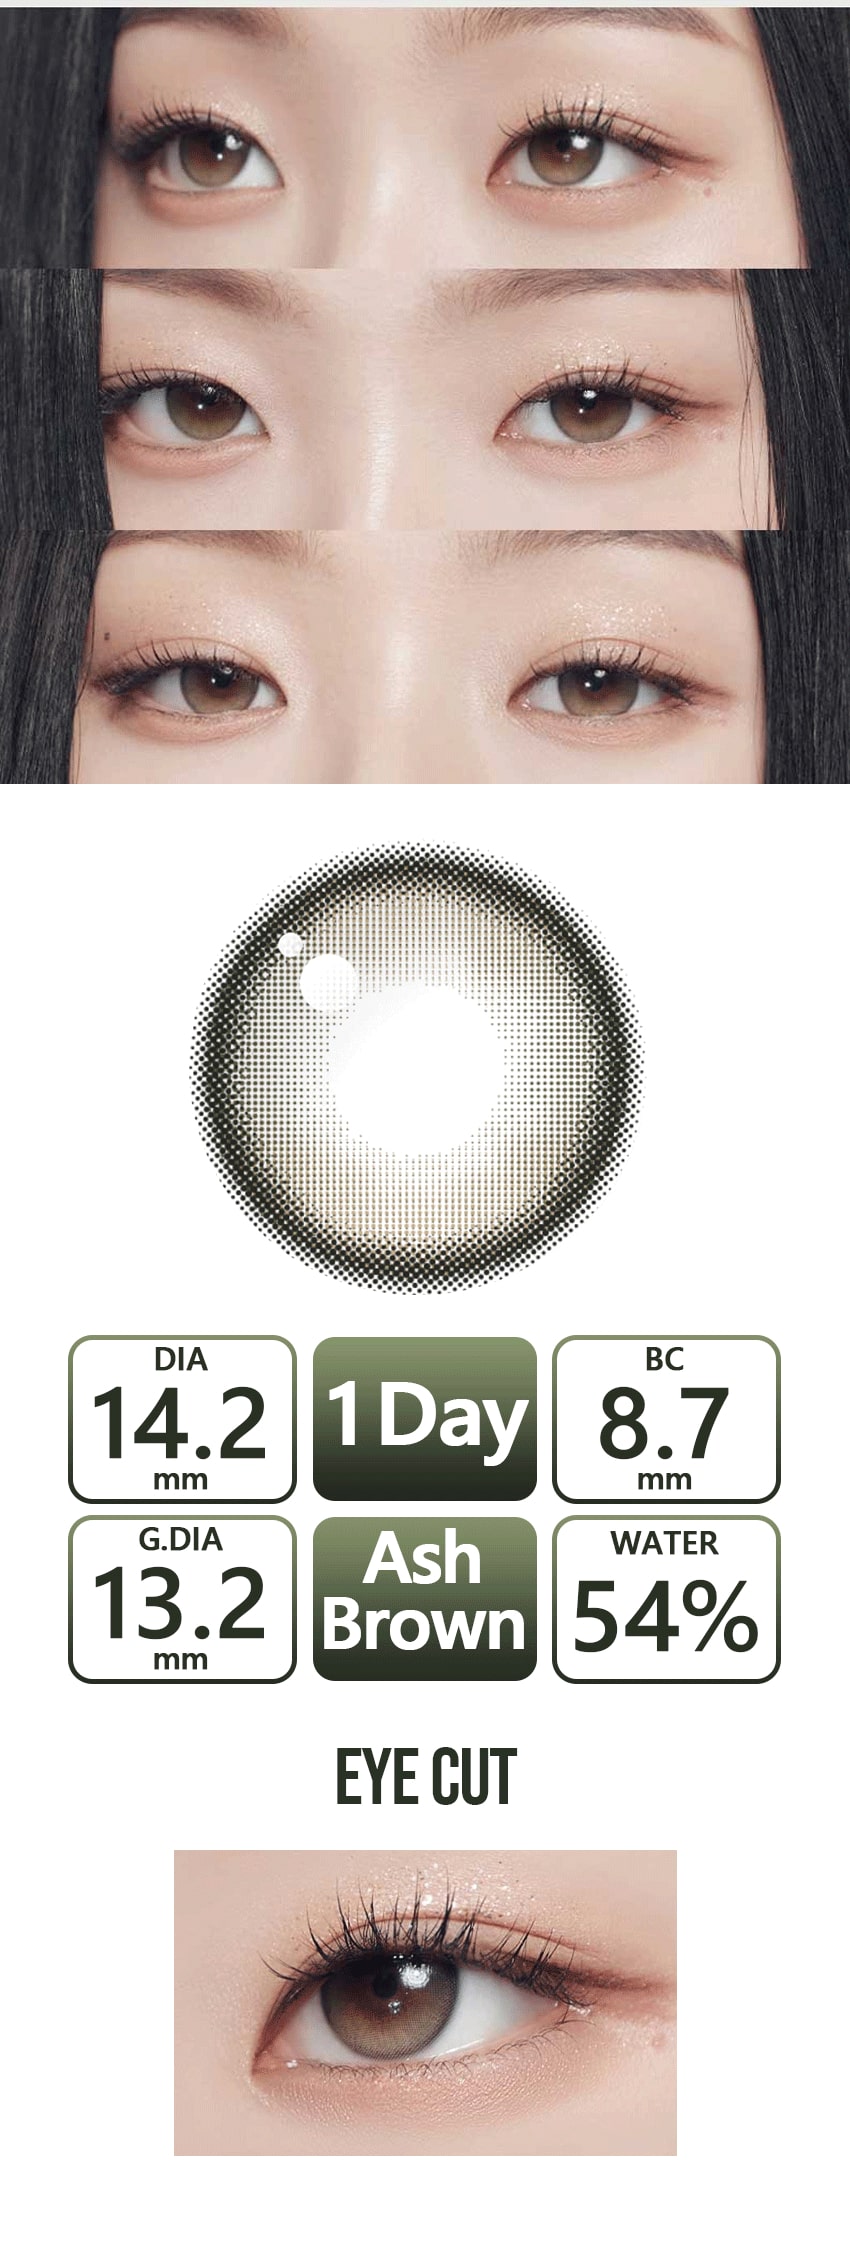  queenslens, queencontacts,gemhour,ジェムアワー,SNS人気カラン,デメテルアッシュブラウン,１ヶ月,demeter,ashbrown,,contacts,1day,brown